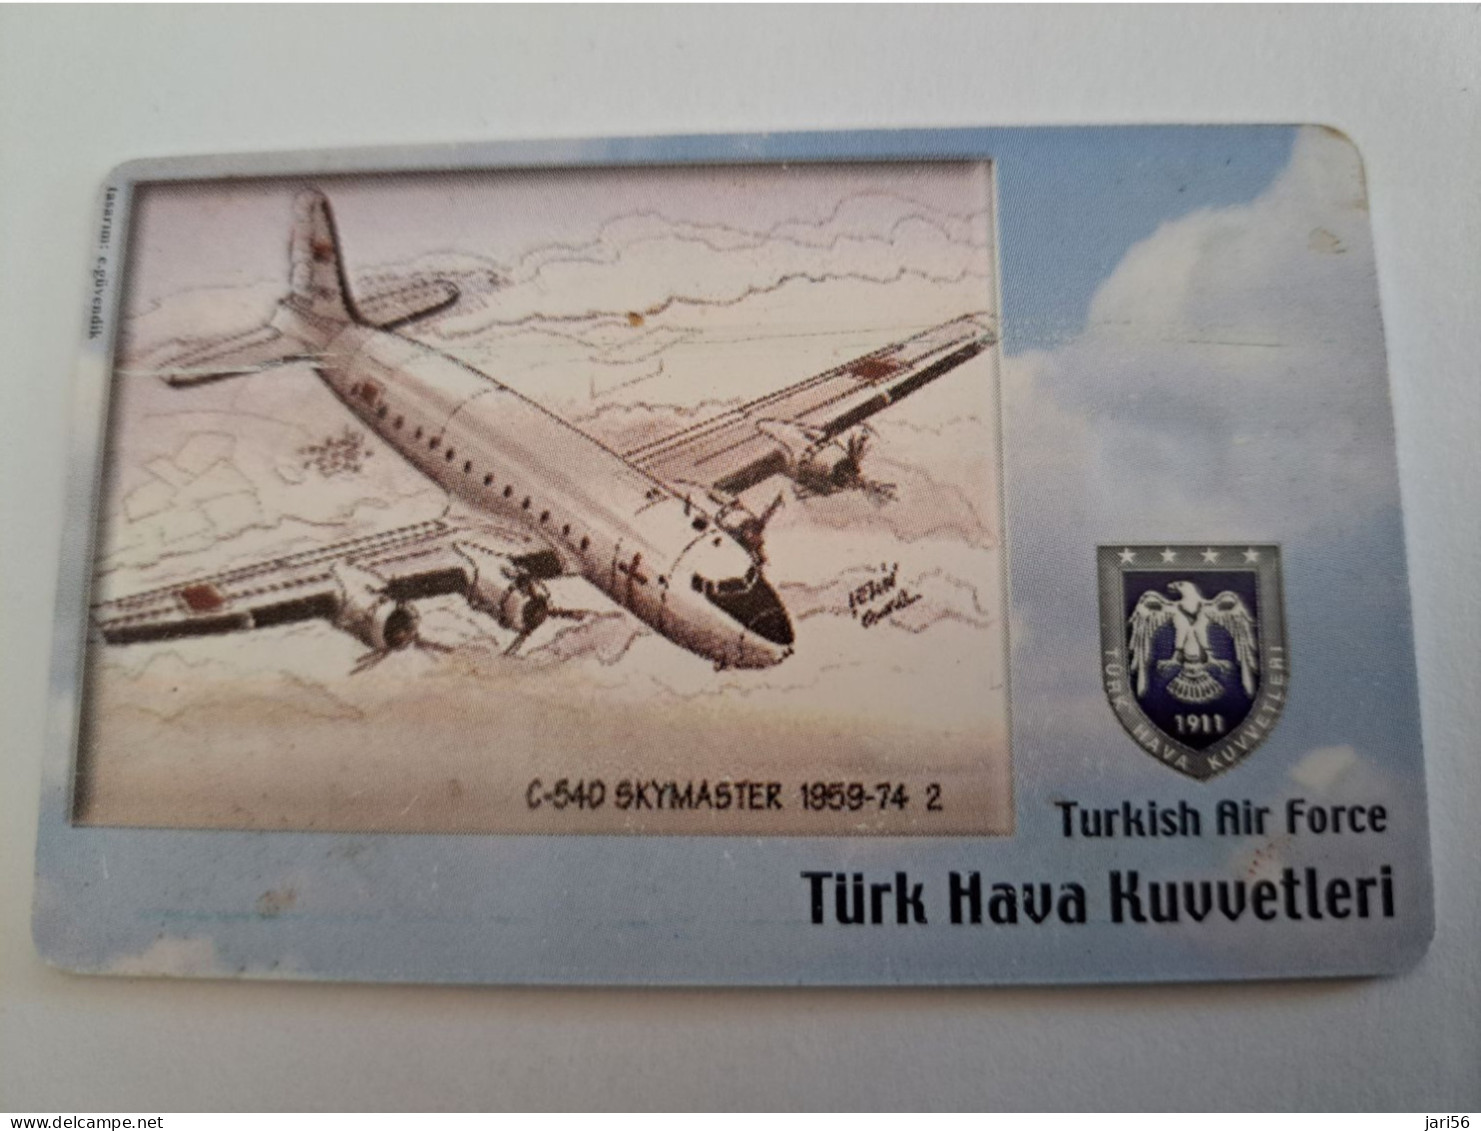 TURKIJE / 50 UNITS/ CHIPCARD/ TURKISH AIR FORCE  / DIFFERENT PLANES /        Fine Used Card  **15405** - Turquie